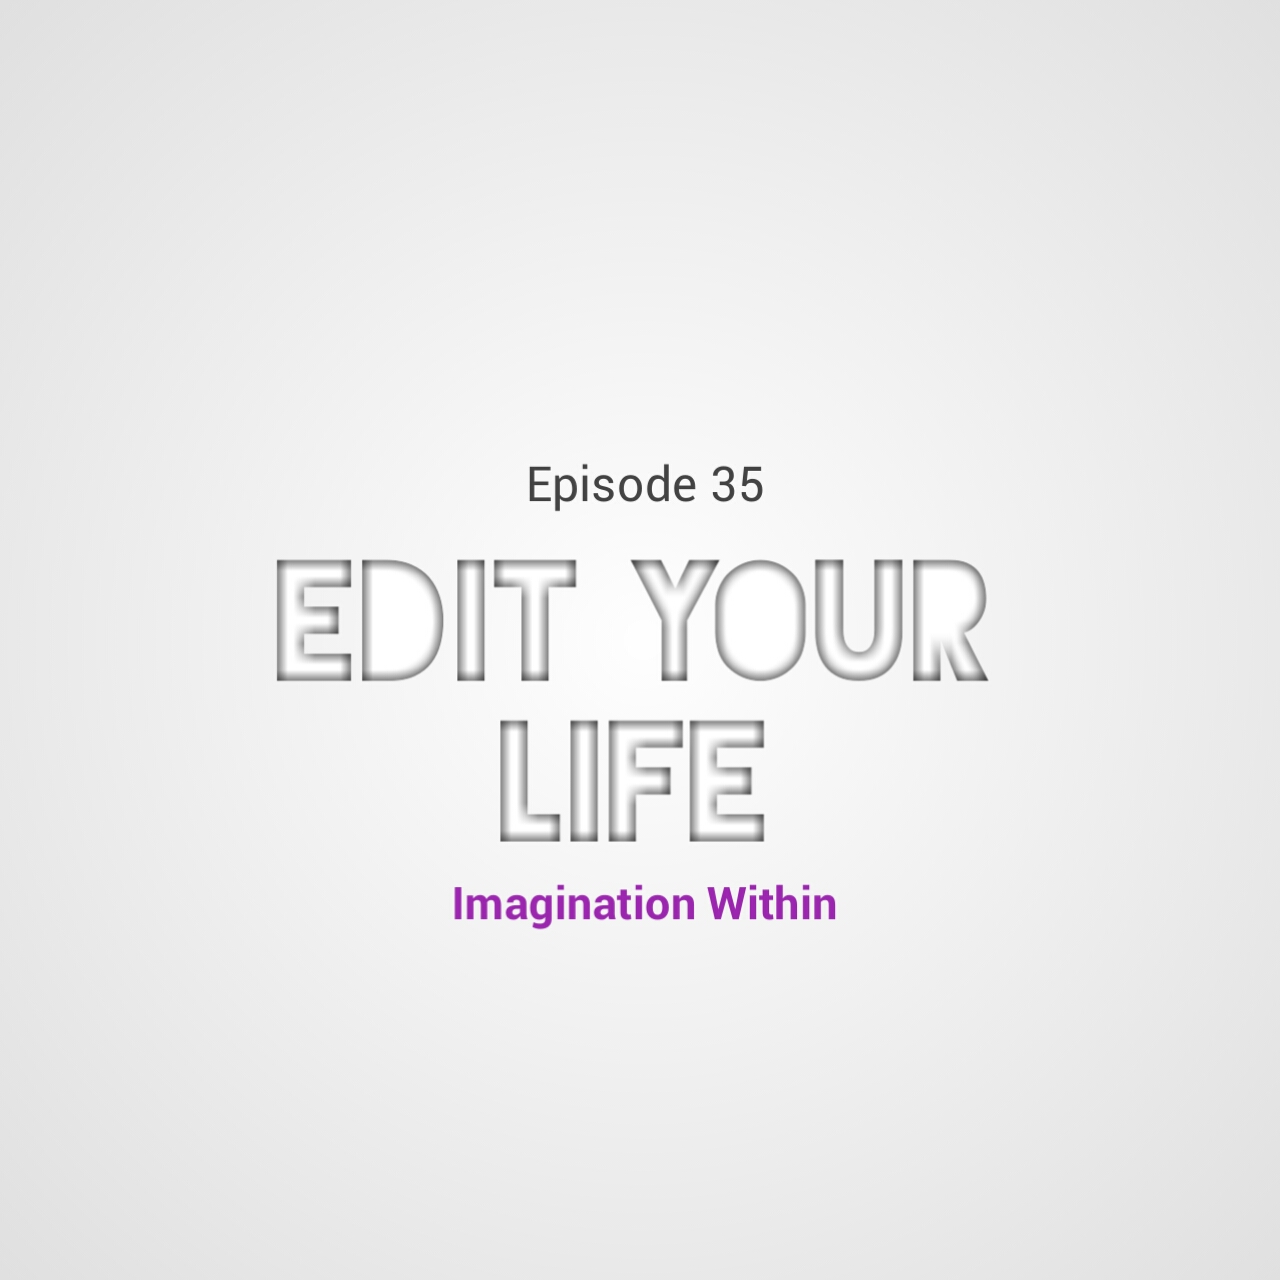 Episode 35 Editing your life